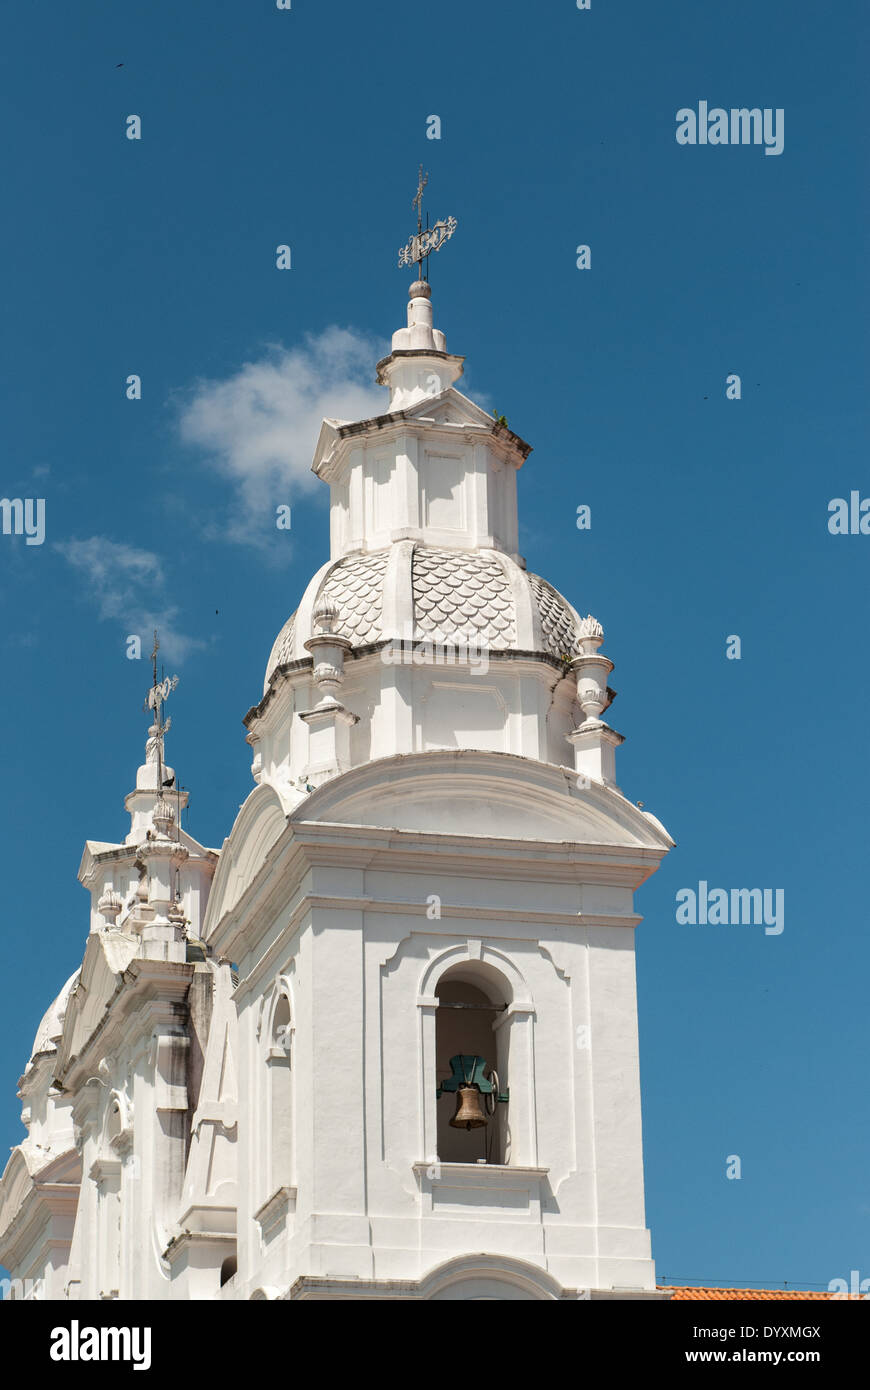 Belem, Para State, Brazil. Cathedral. Catedral da Se. The annual Cirio festival is celebrated here. Stock Photo